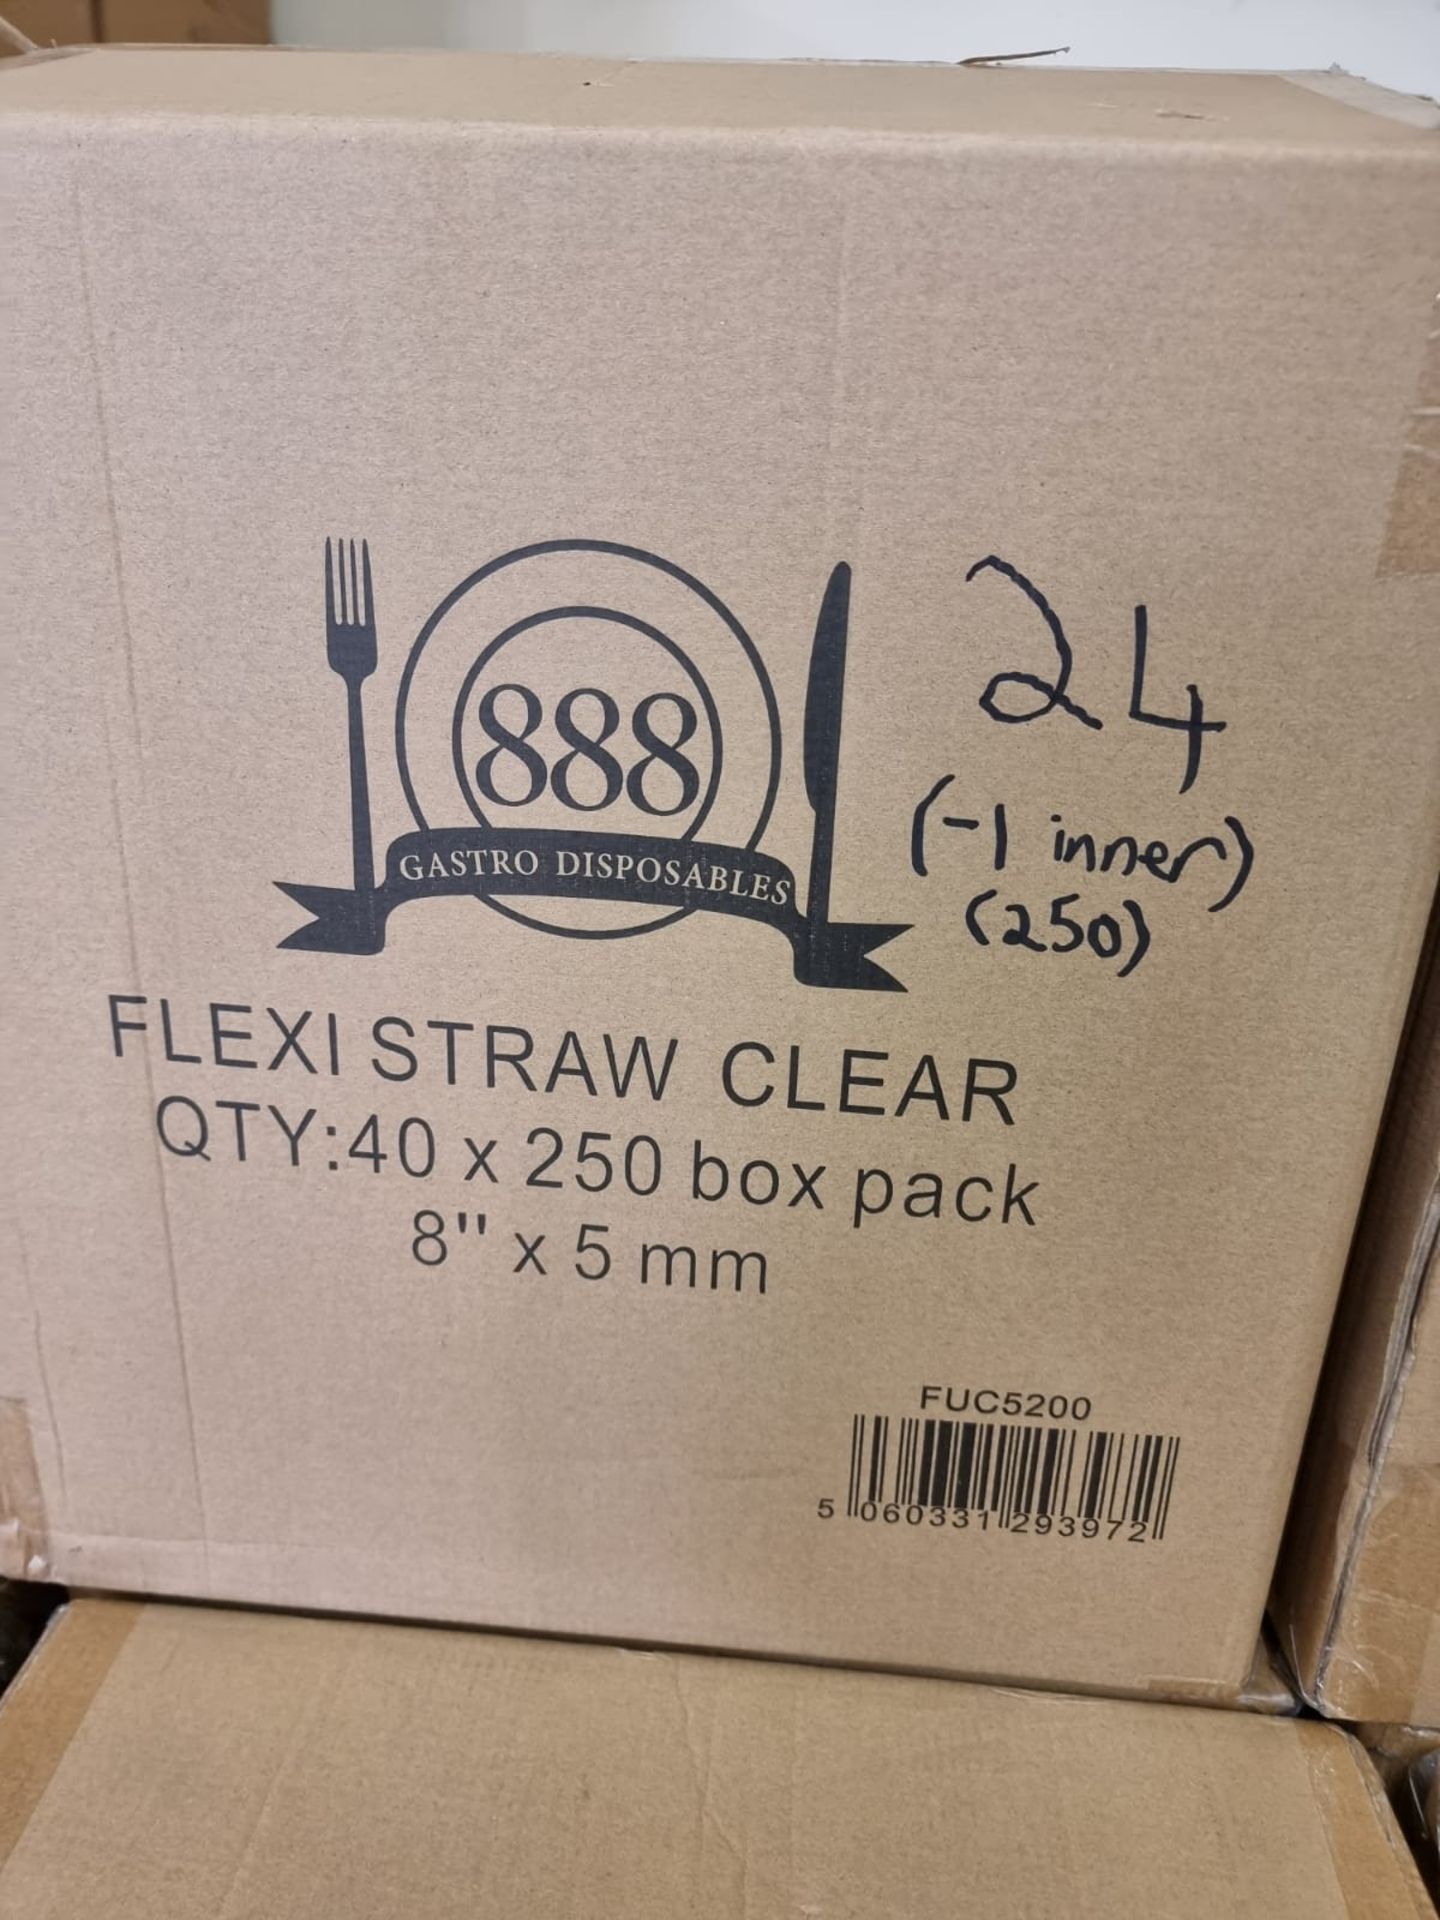 Approx 239,750 x 8” 5mm Flexi straws in Display Box | Clear - Image 2 of 3